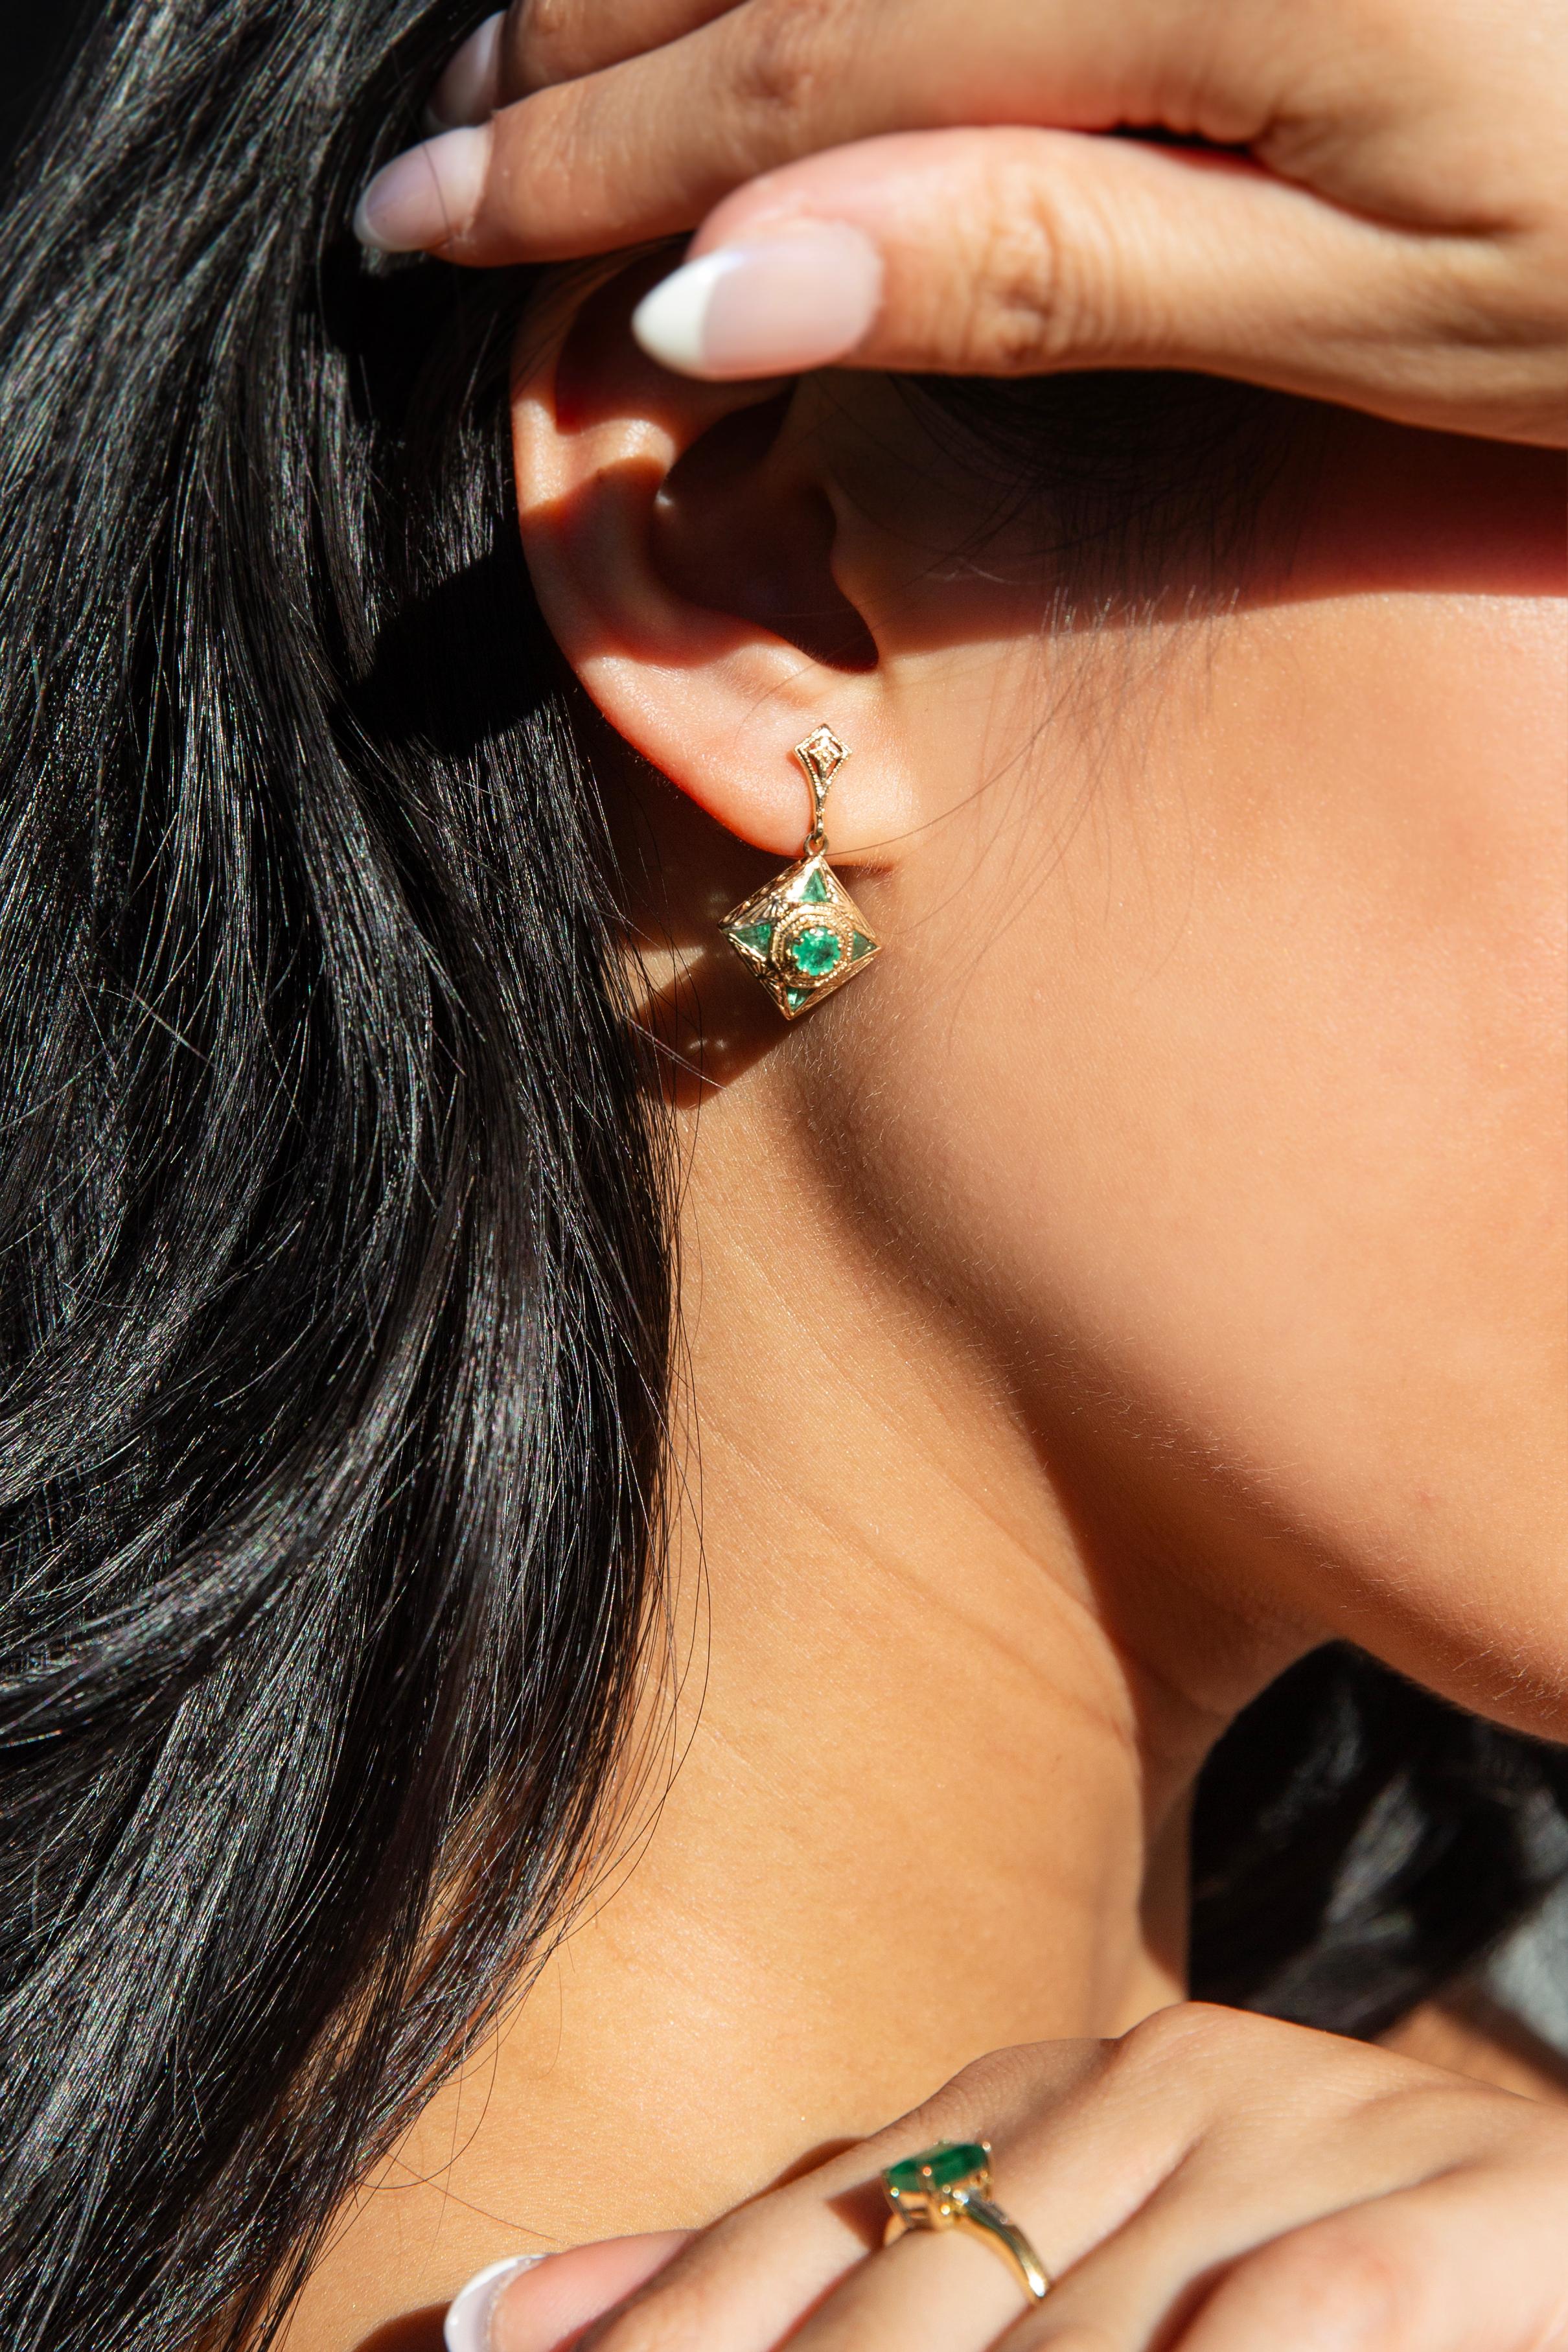 The Gwendolyne Earrings are a nod to the Golden Age of cinema, structured lines reminiscent of a time when cinema, architecture and fashion created a style that is still much sought after today. Crafted with vivid green emeralds, She is the lead in